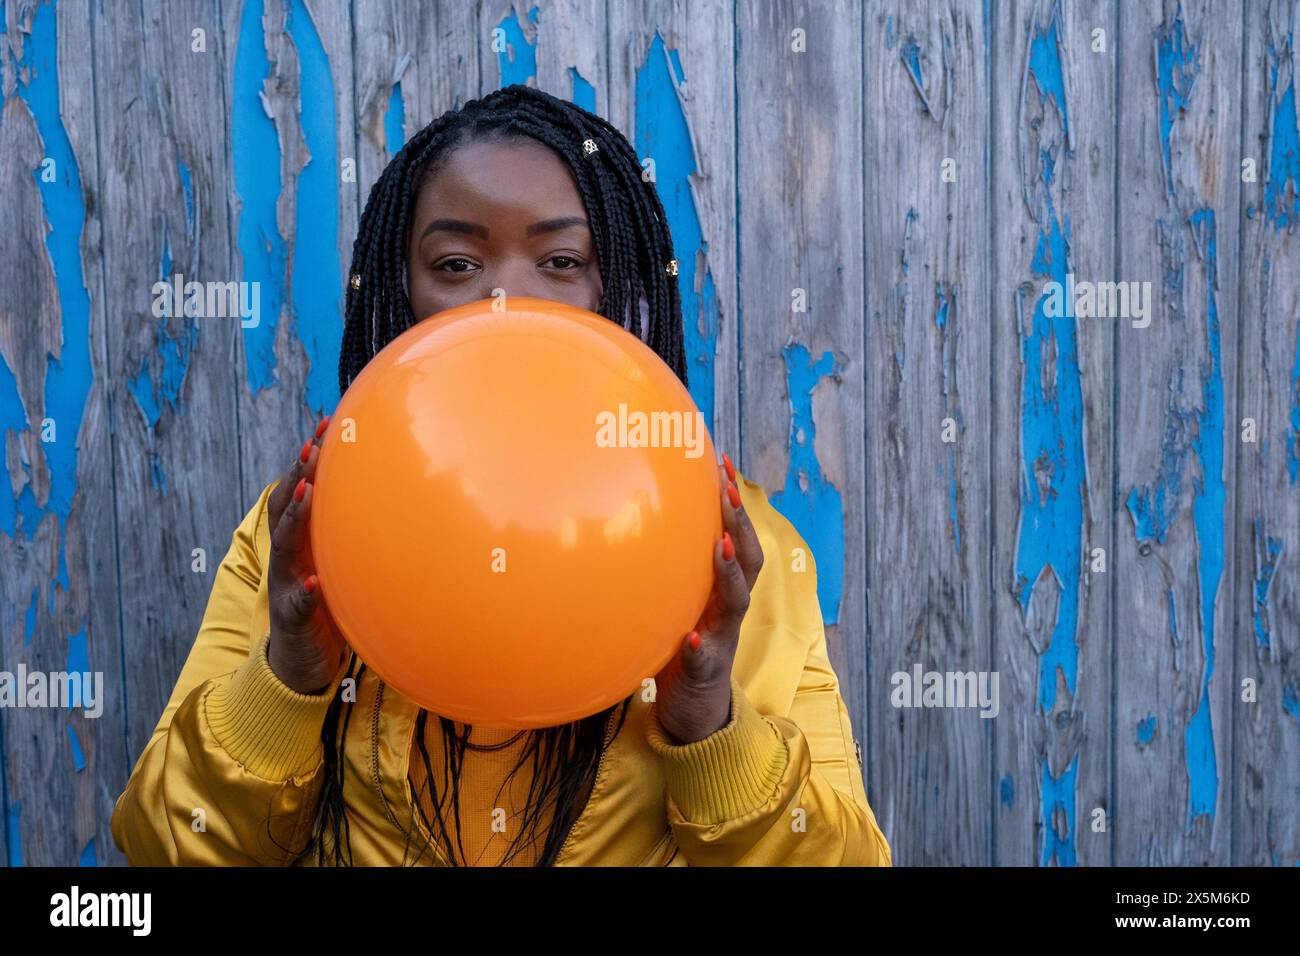 UK, South Yorkshire, Portrait of woman with braided hair blowing orange balloon Stock Photo